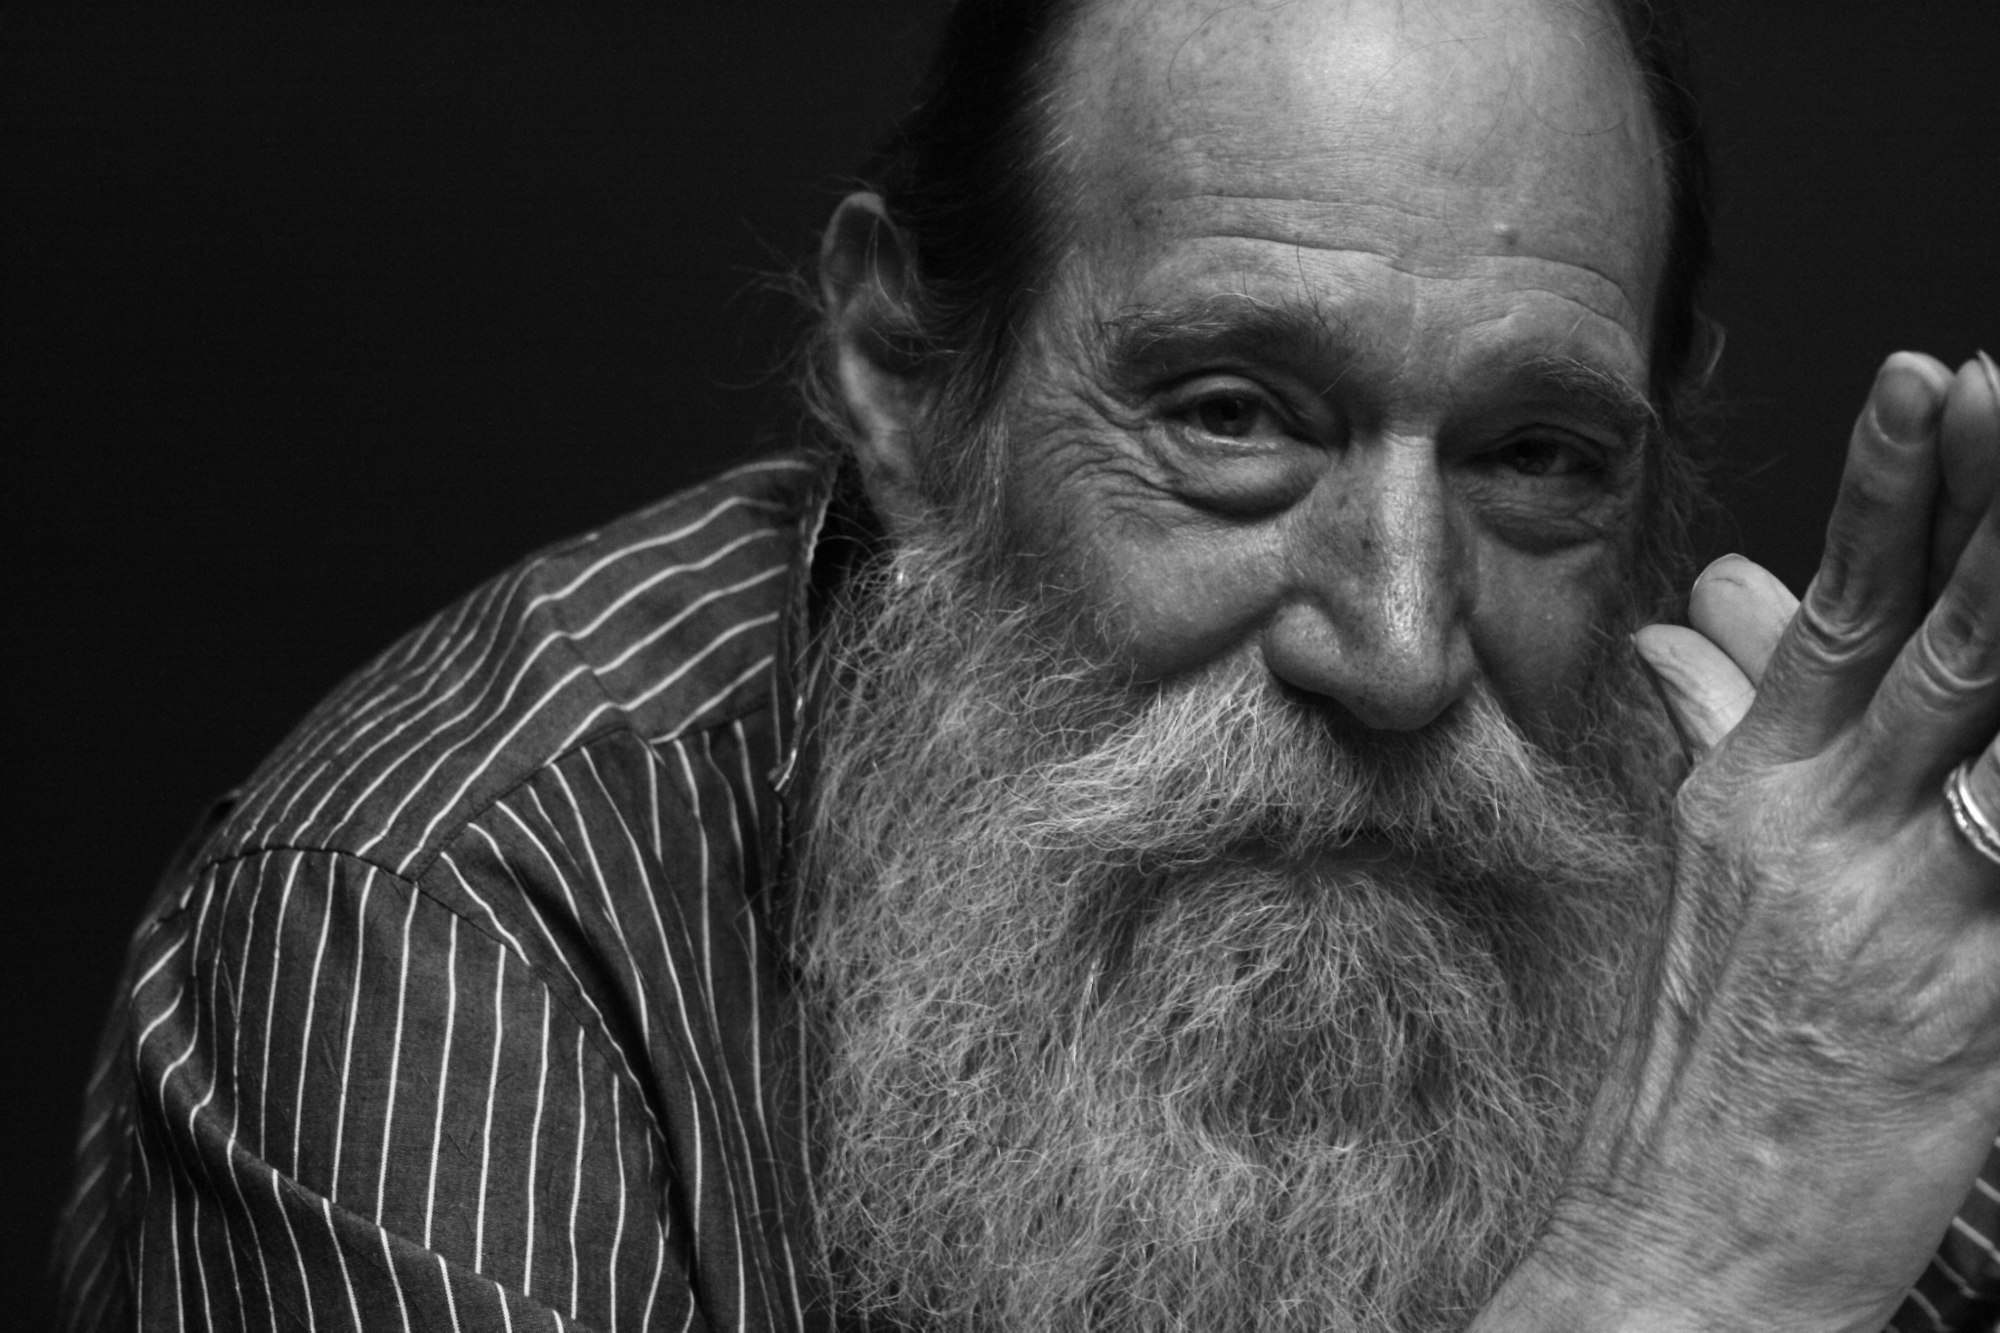 Black and white portrait of the artist Lawrence Weiner